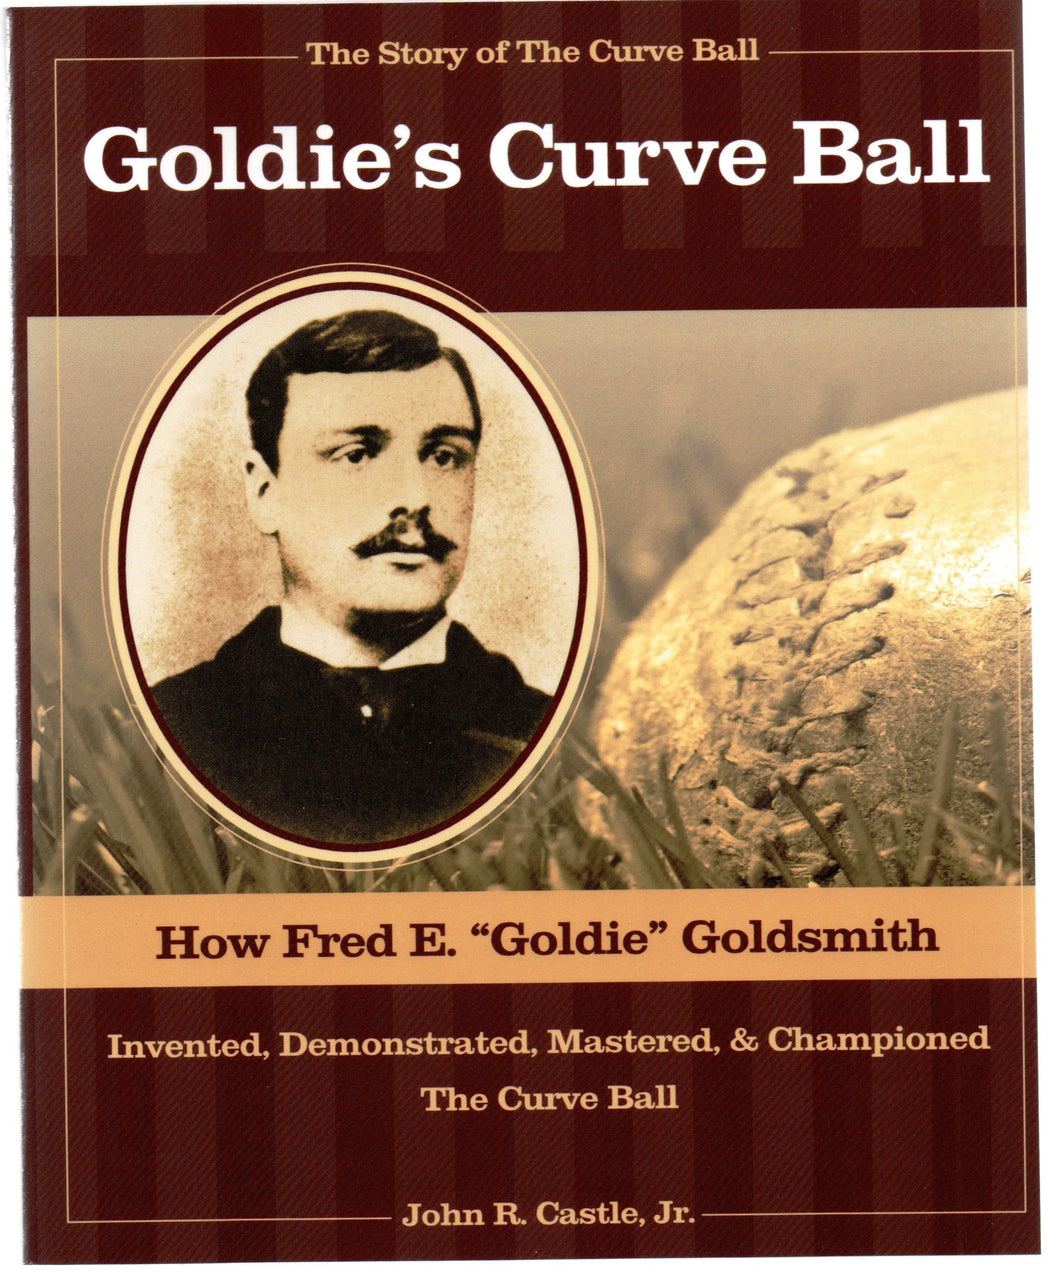 Goldie's Curve Ball: How Fred E. "Goldie" Goldsmith Invented, Demonstrated, Mastered, & Championed The Curve Ball